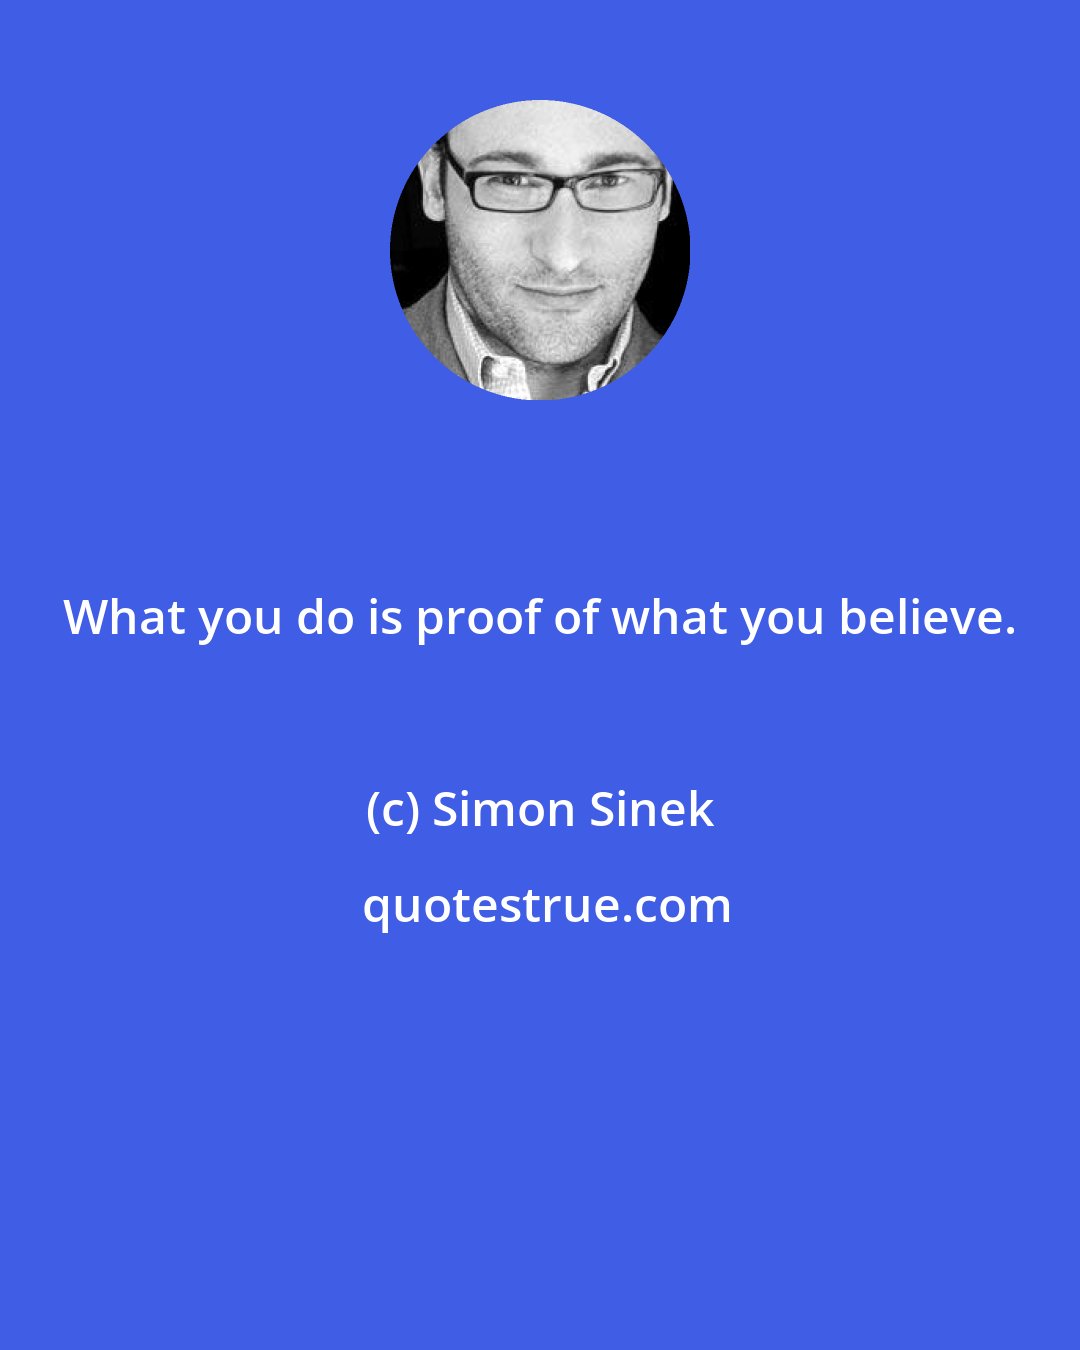 Simon Sinek: What you do is proof of what you believe.